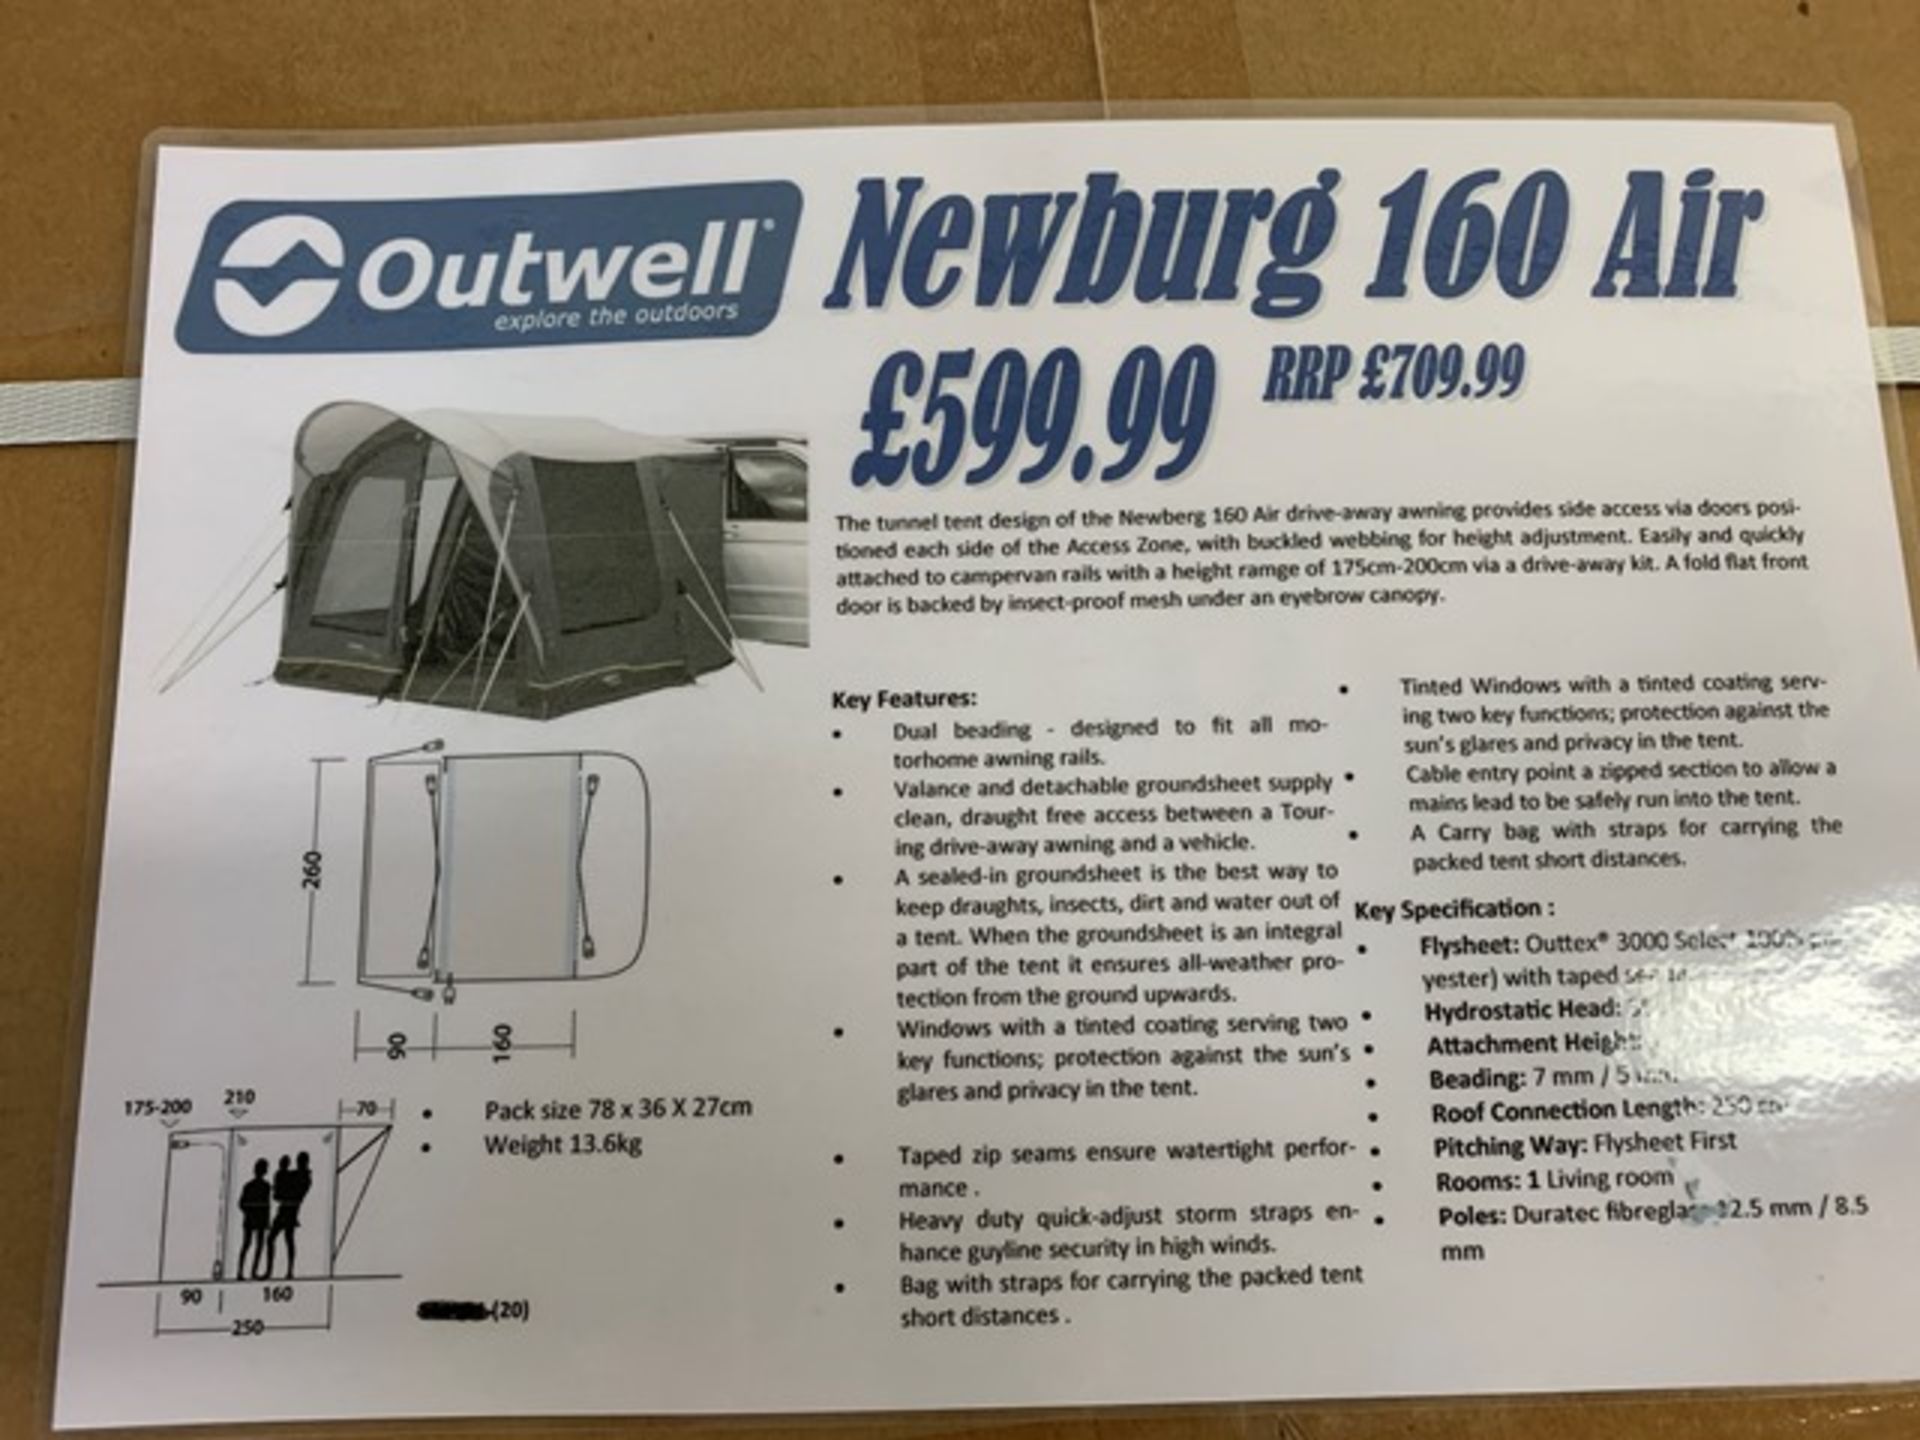 Outwell Newburg 160 air drive away awning for campervans (Boxed) - Image 2 of 2